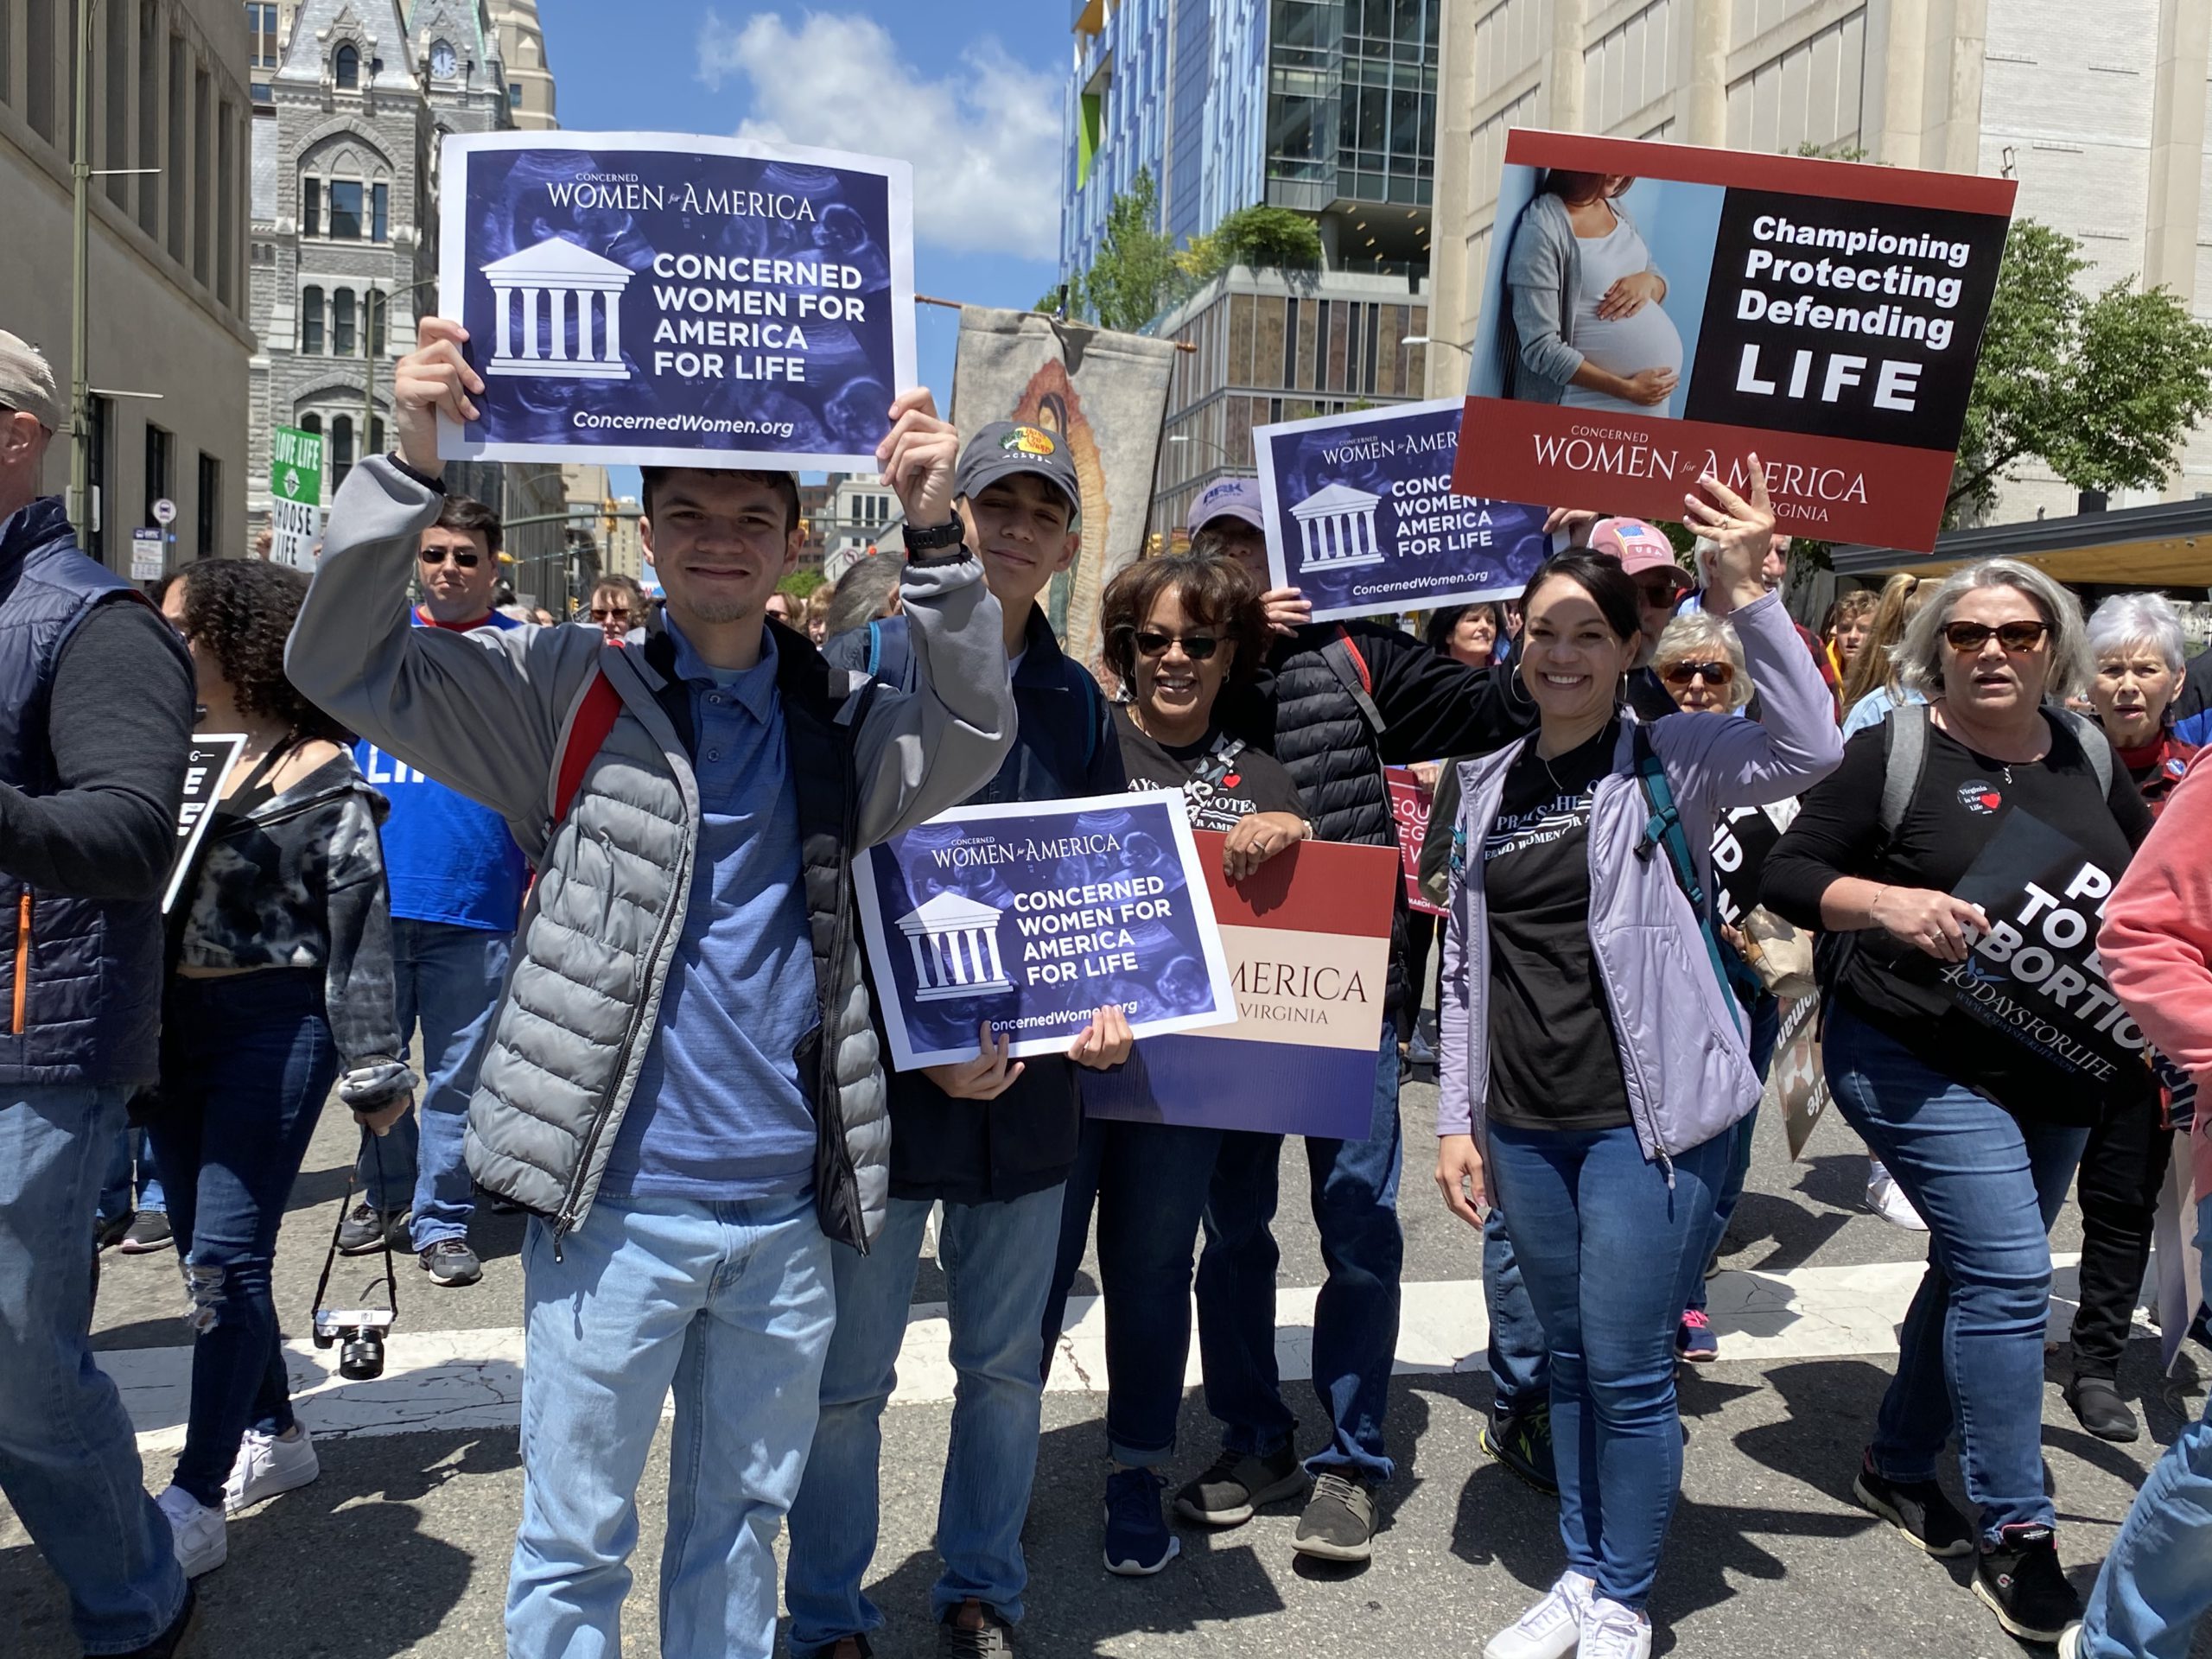 Marching for Life Prayer Warriors